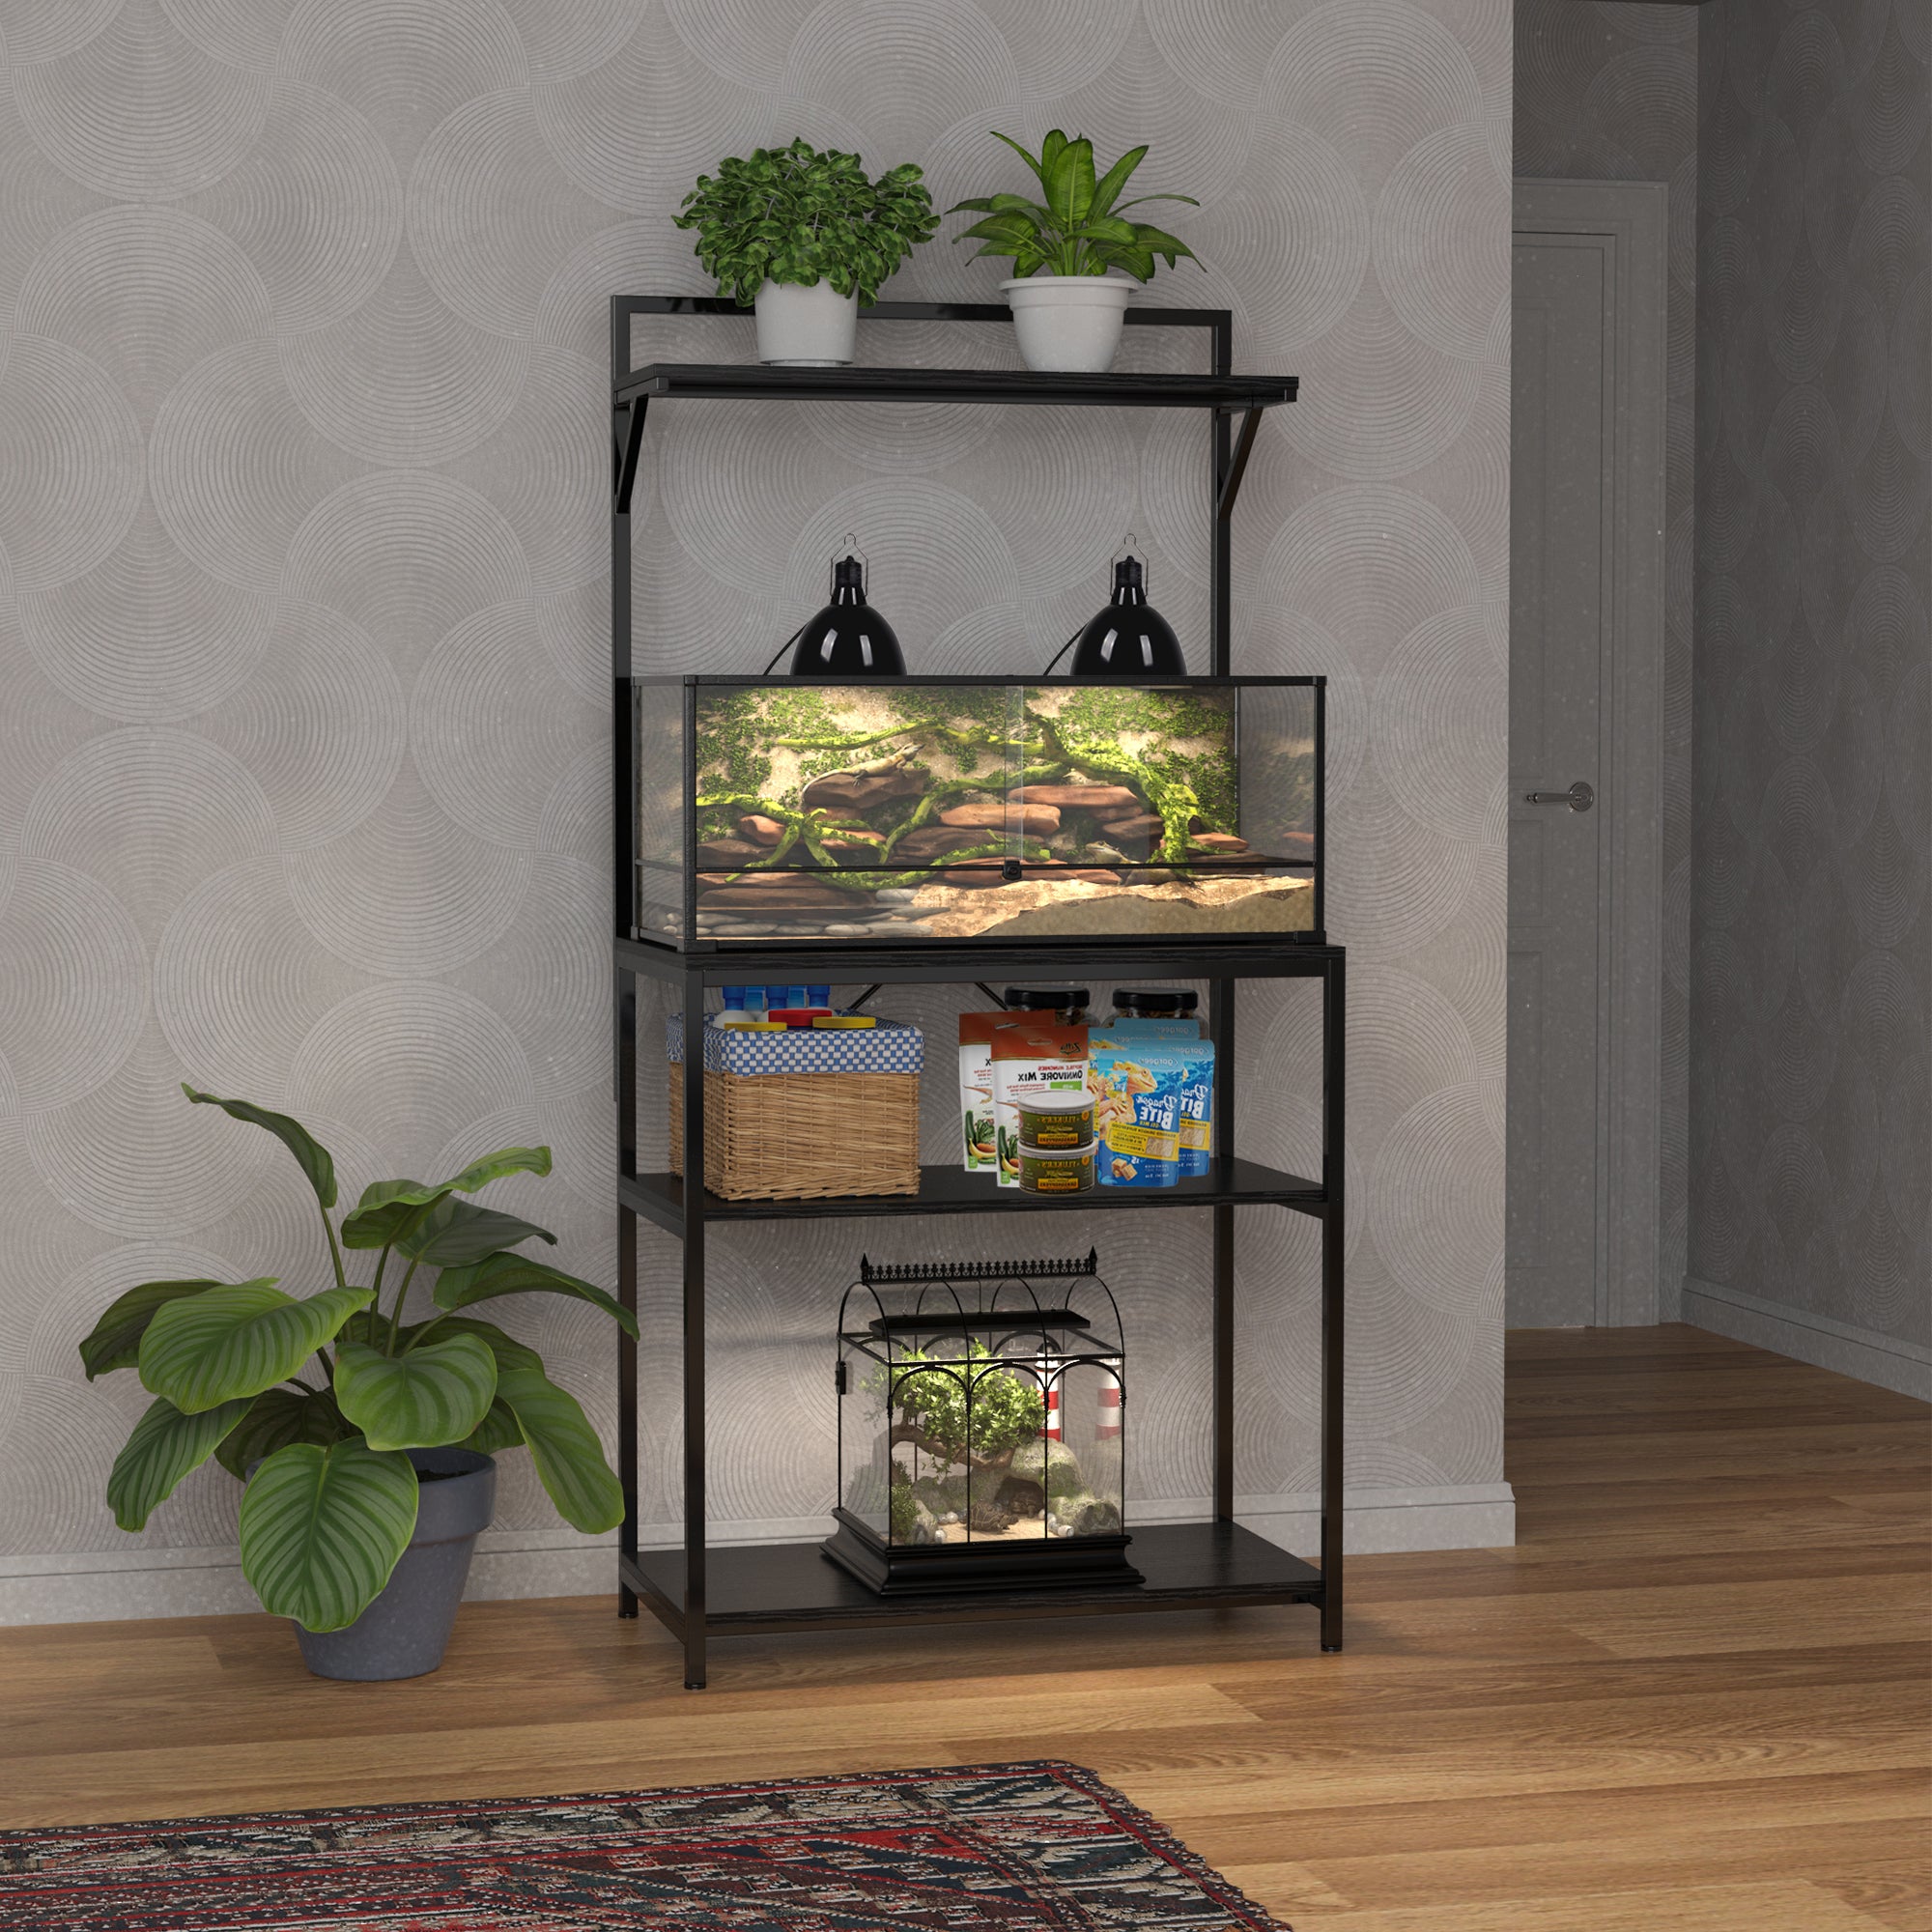 20-29 Gallon Fish Tank Stand with Plant Shelf, Aquarium Stand with